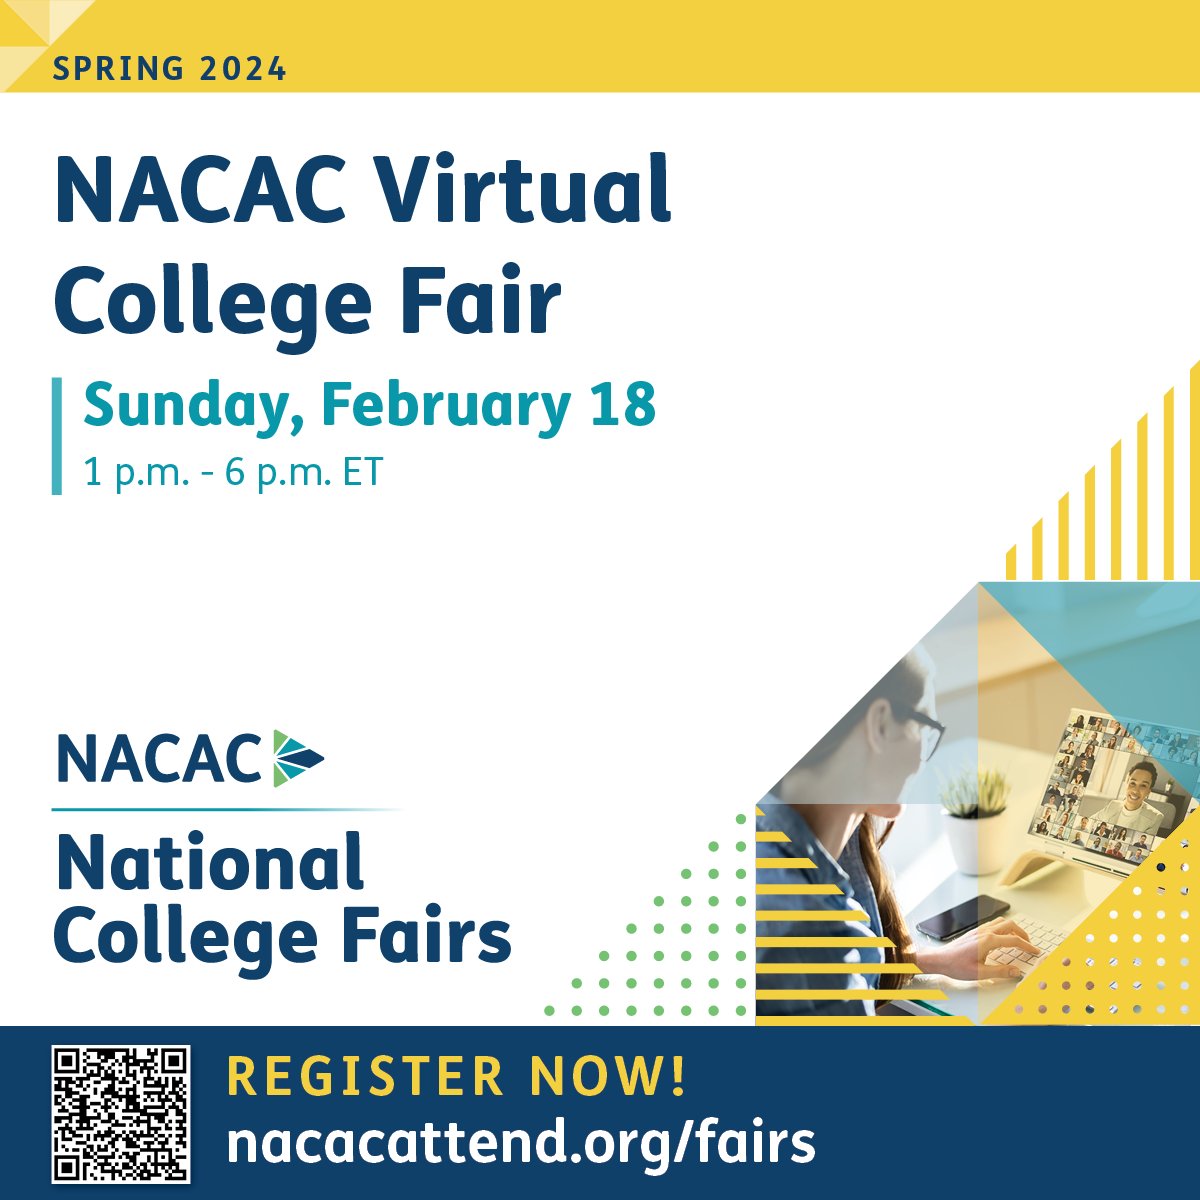 Get connected with colleges and universities…without leaving home! Register now for NACAC's first virtual #collegefair of 2024. Join us this Sunday, Feb 18! nacacattend.org/fairs #collegefairs #NACAfairs